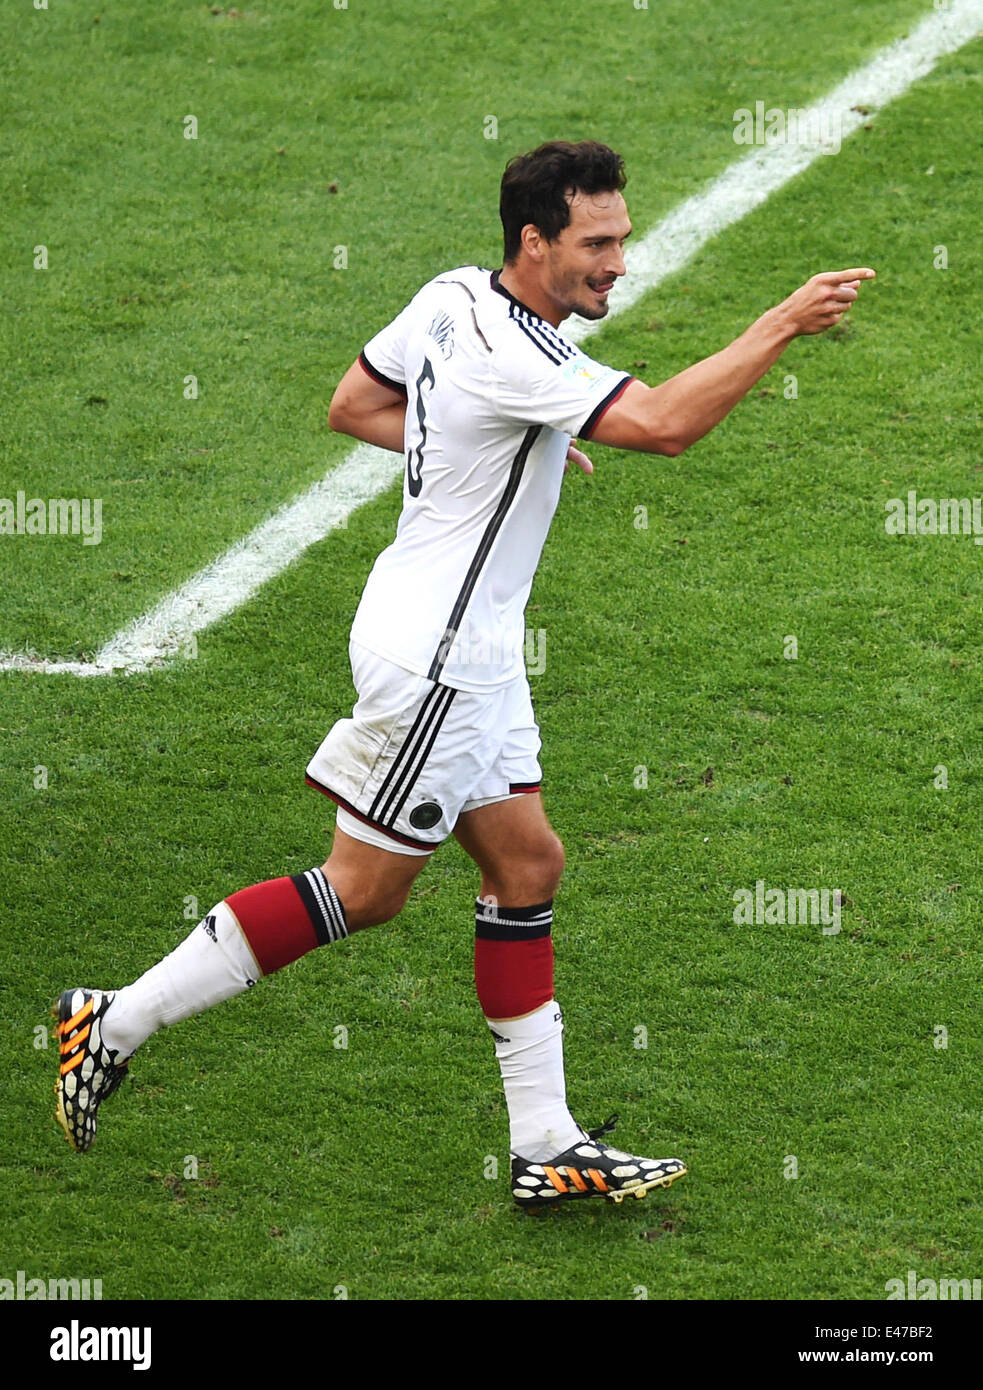 Rio de Janeiro, Brazil. 04th July, 2014. Mats Hummels of Germany celebrates his 0-1 goal during the FIFA World Cup 2014 quarter final soccer match between France and Germany at Estadio do Maracana in Rio de Janeiro, Brazil, 04 July 2014. Photo: Marcus Brandt/dpa/Alamy Live News Stock Photo